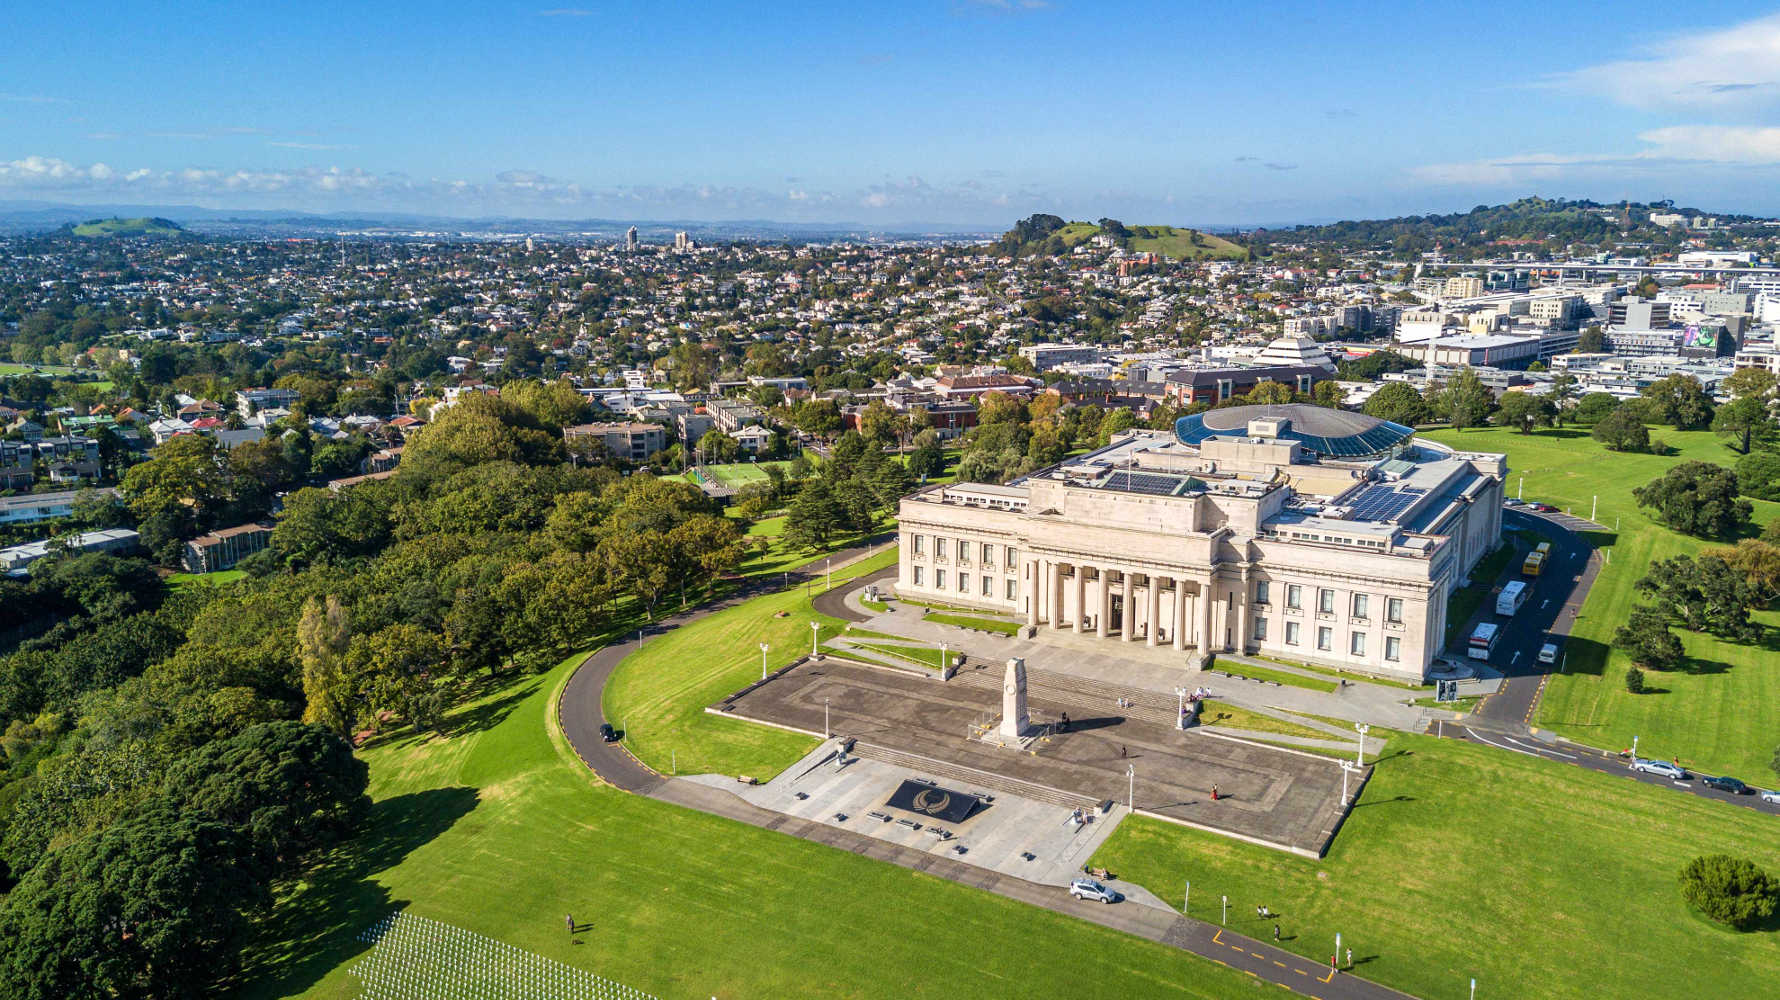 Auckland domain and War Memorial museum with residential suburb on the background. Auckland, New Zealand